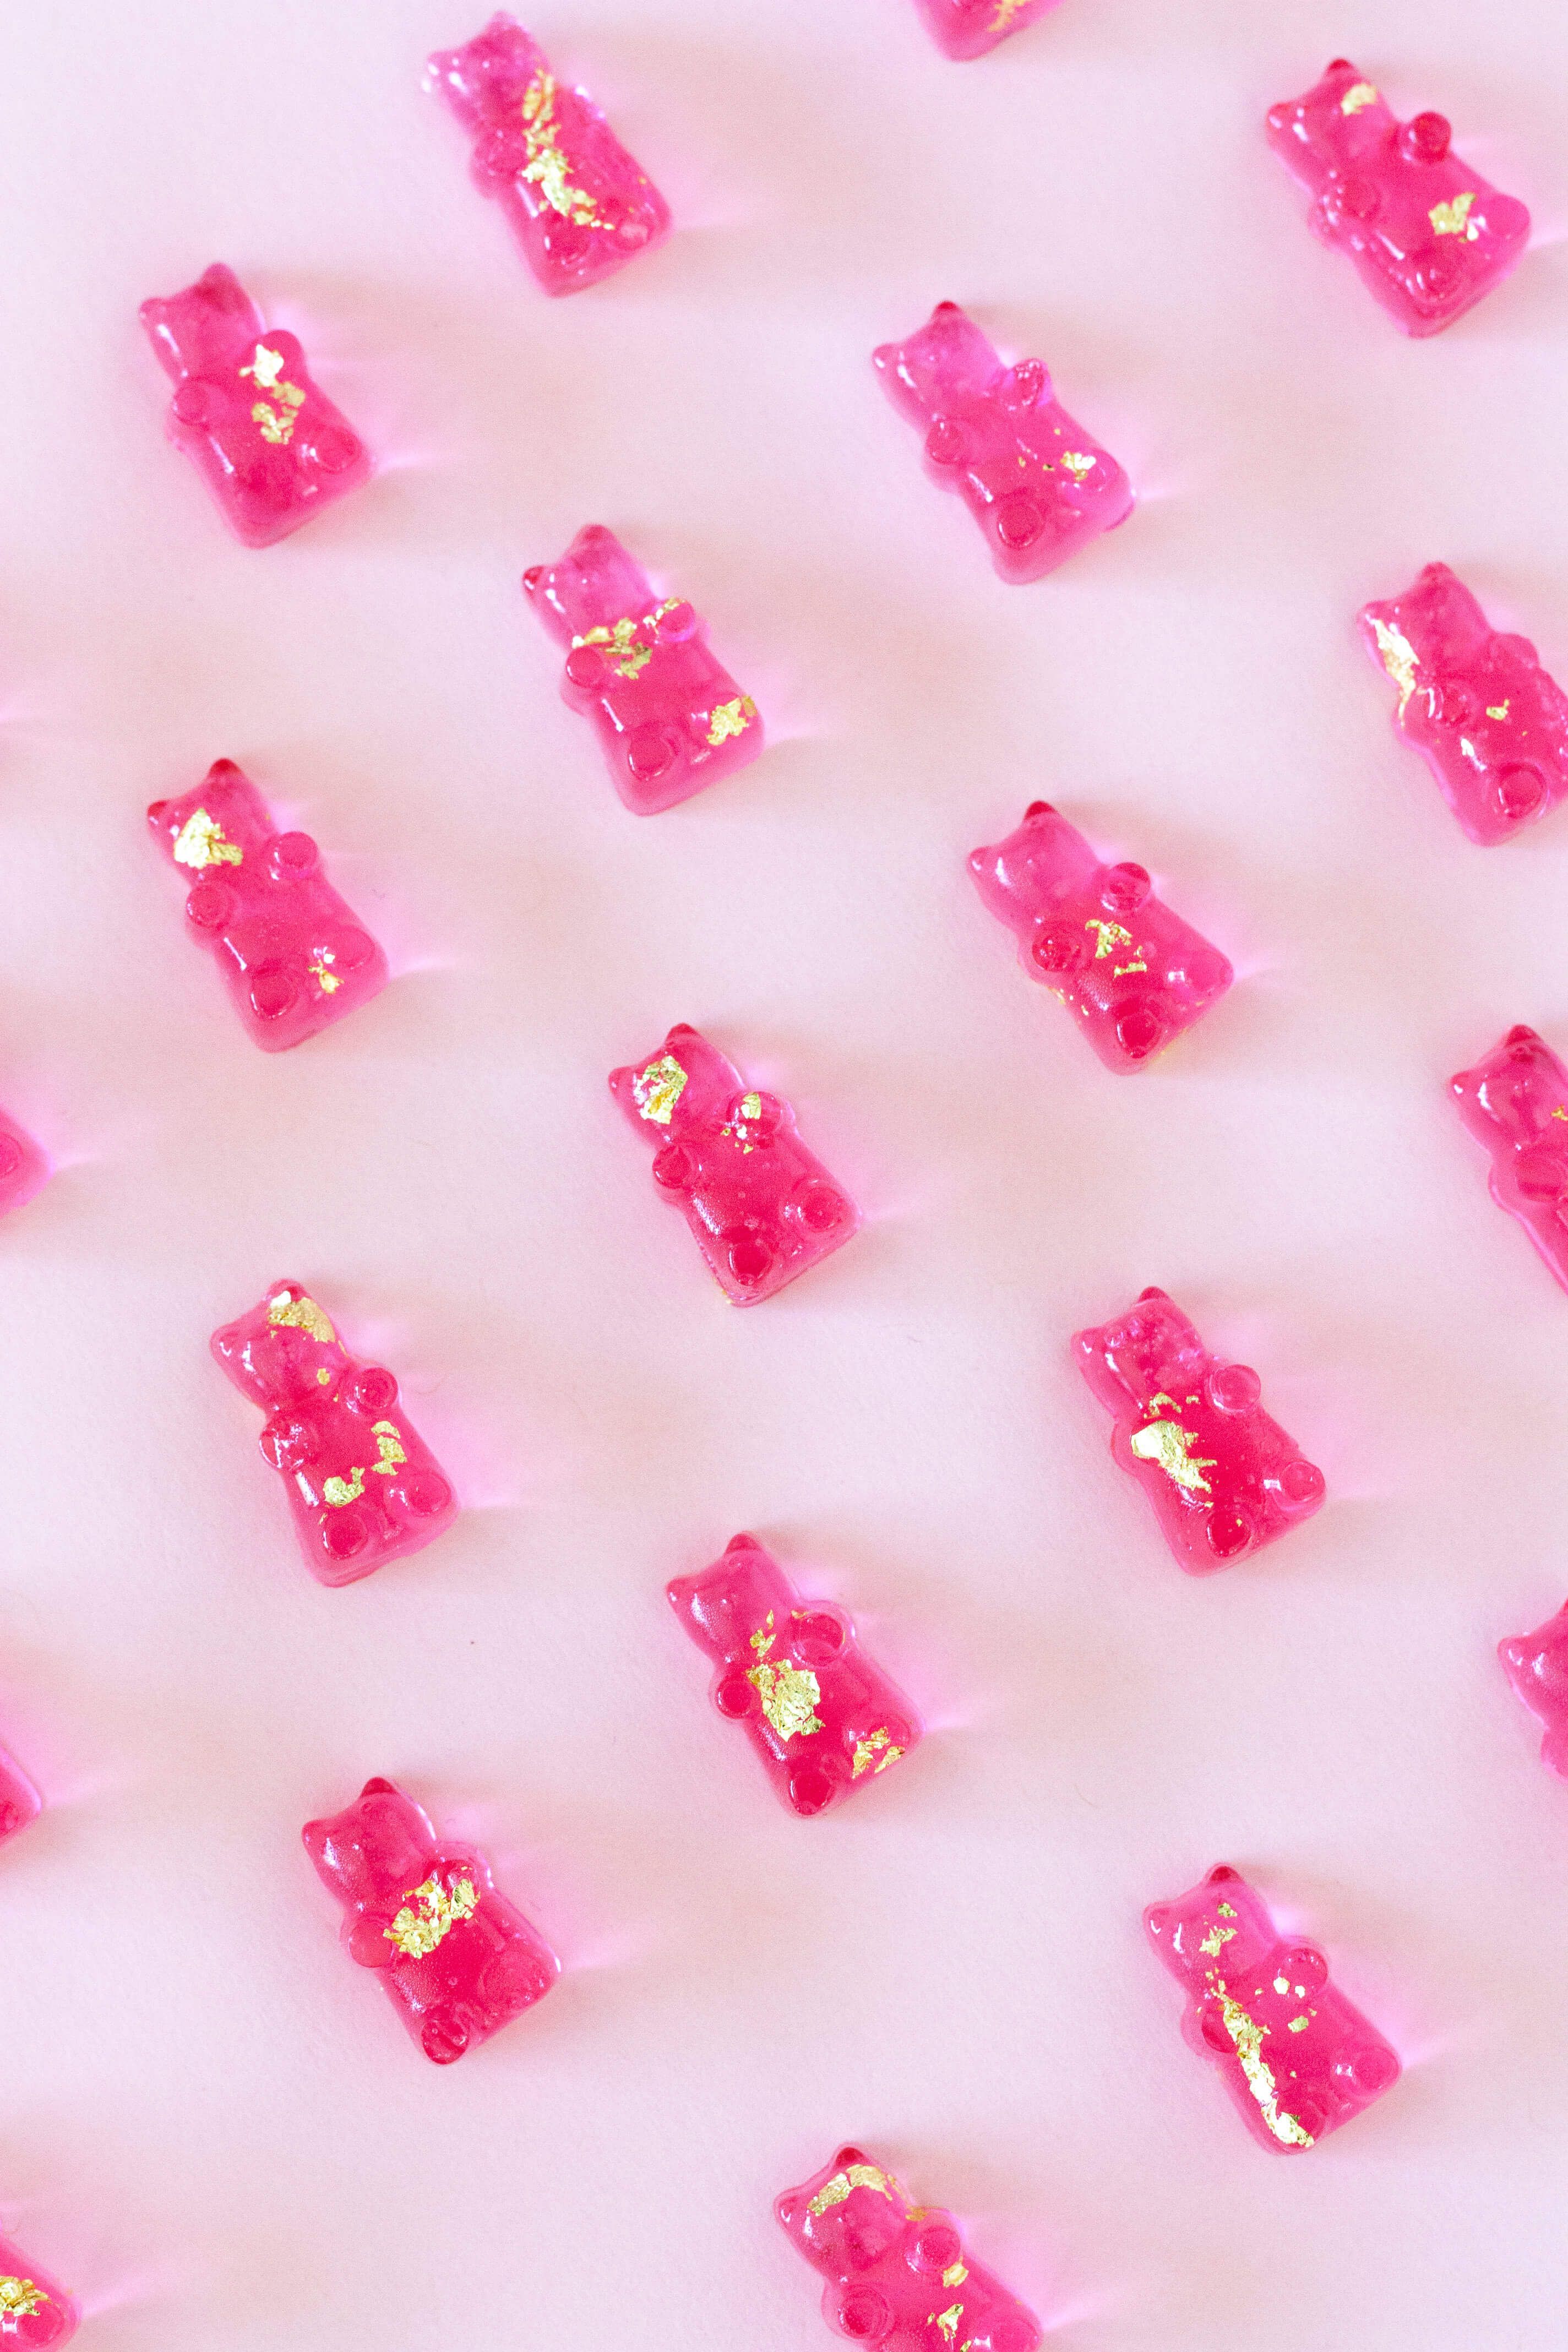 Pink gummy bears with gold flakes on a pink background - Candy